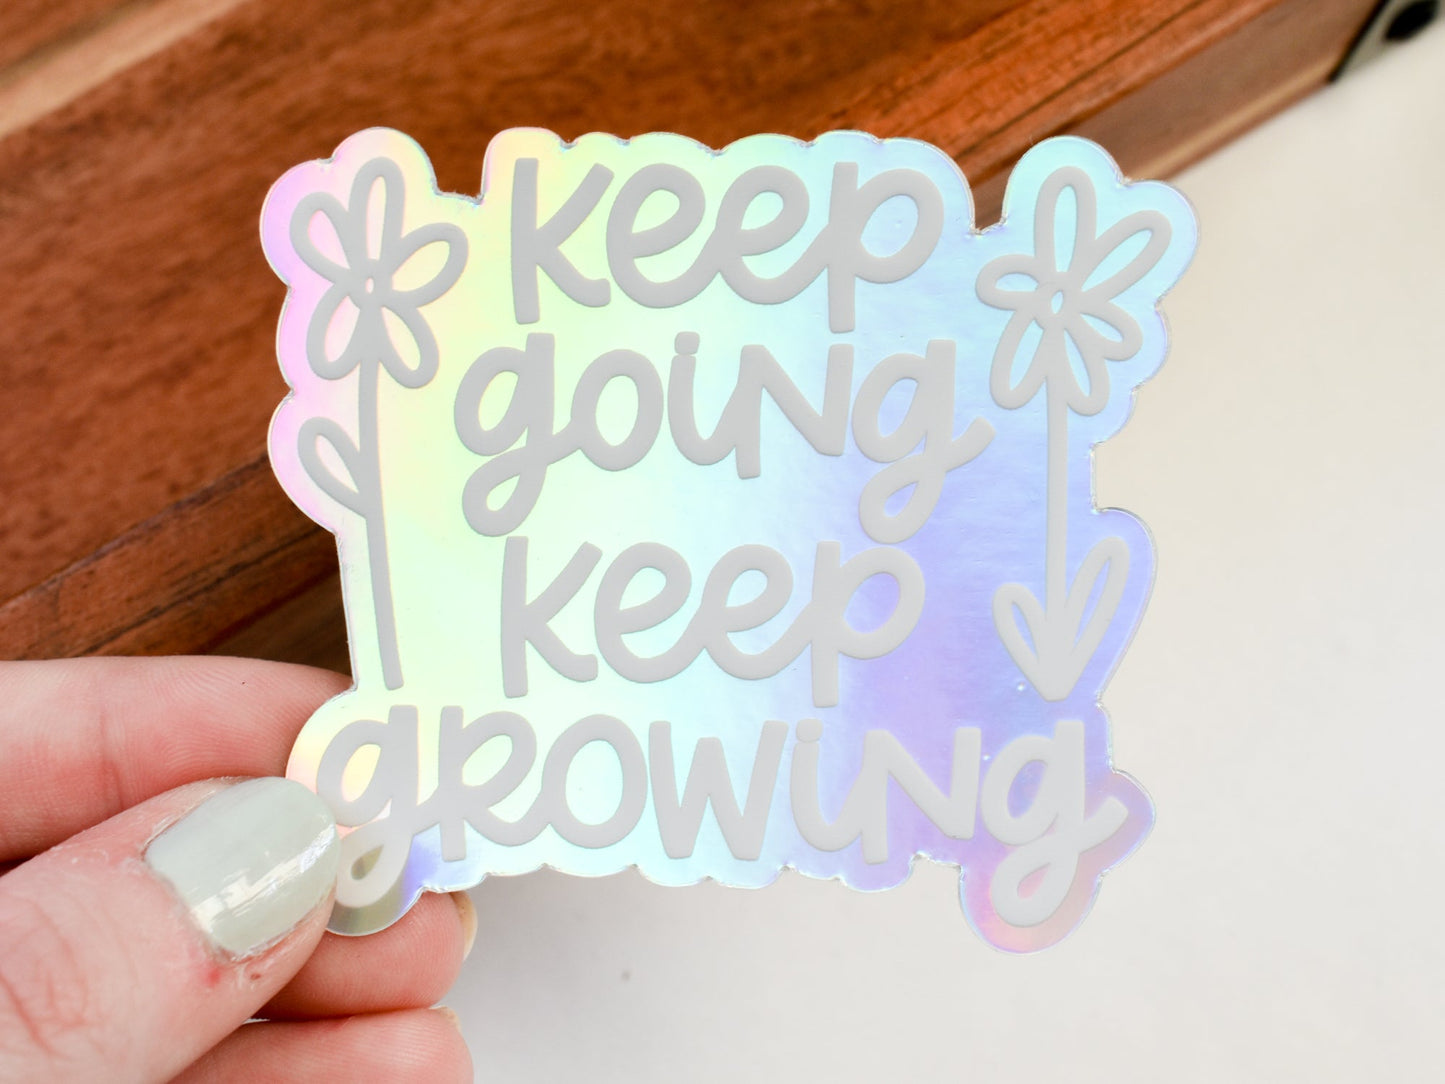 Load image into Gallery viewer, Keep Going Keep Growing Sticker
